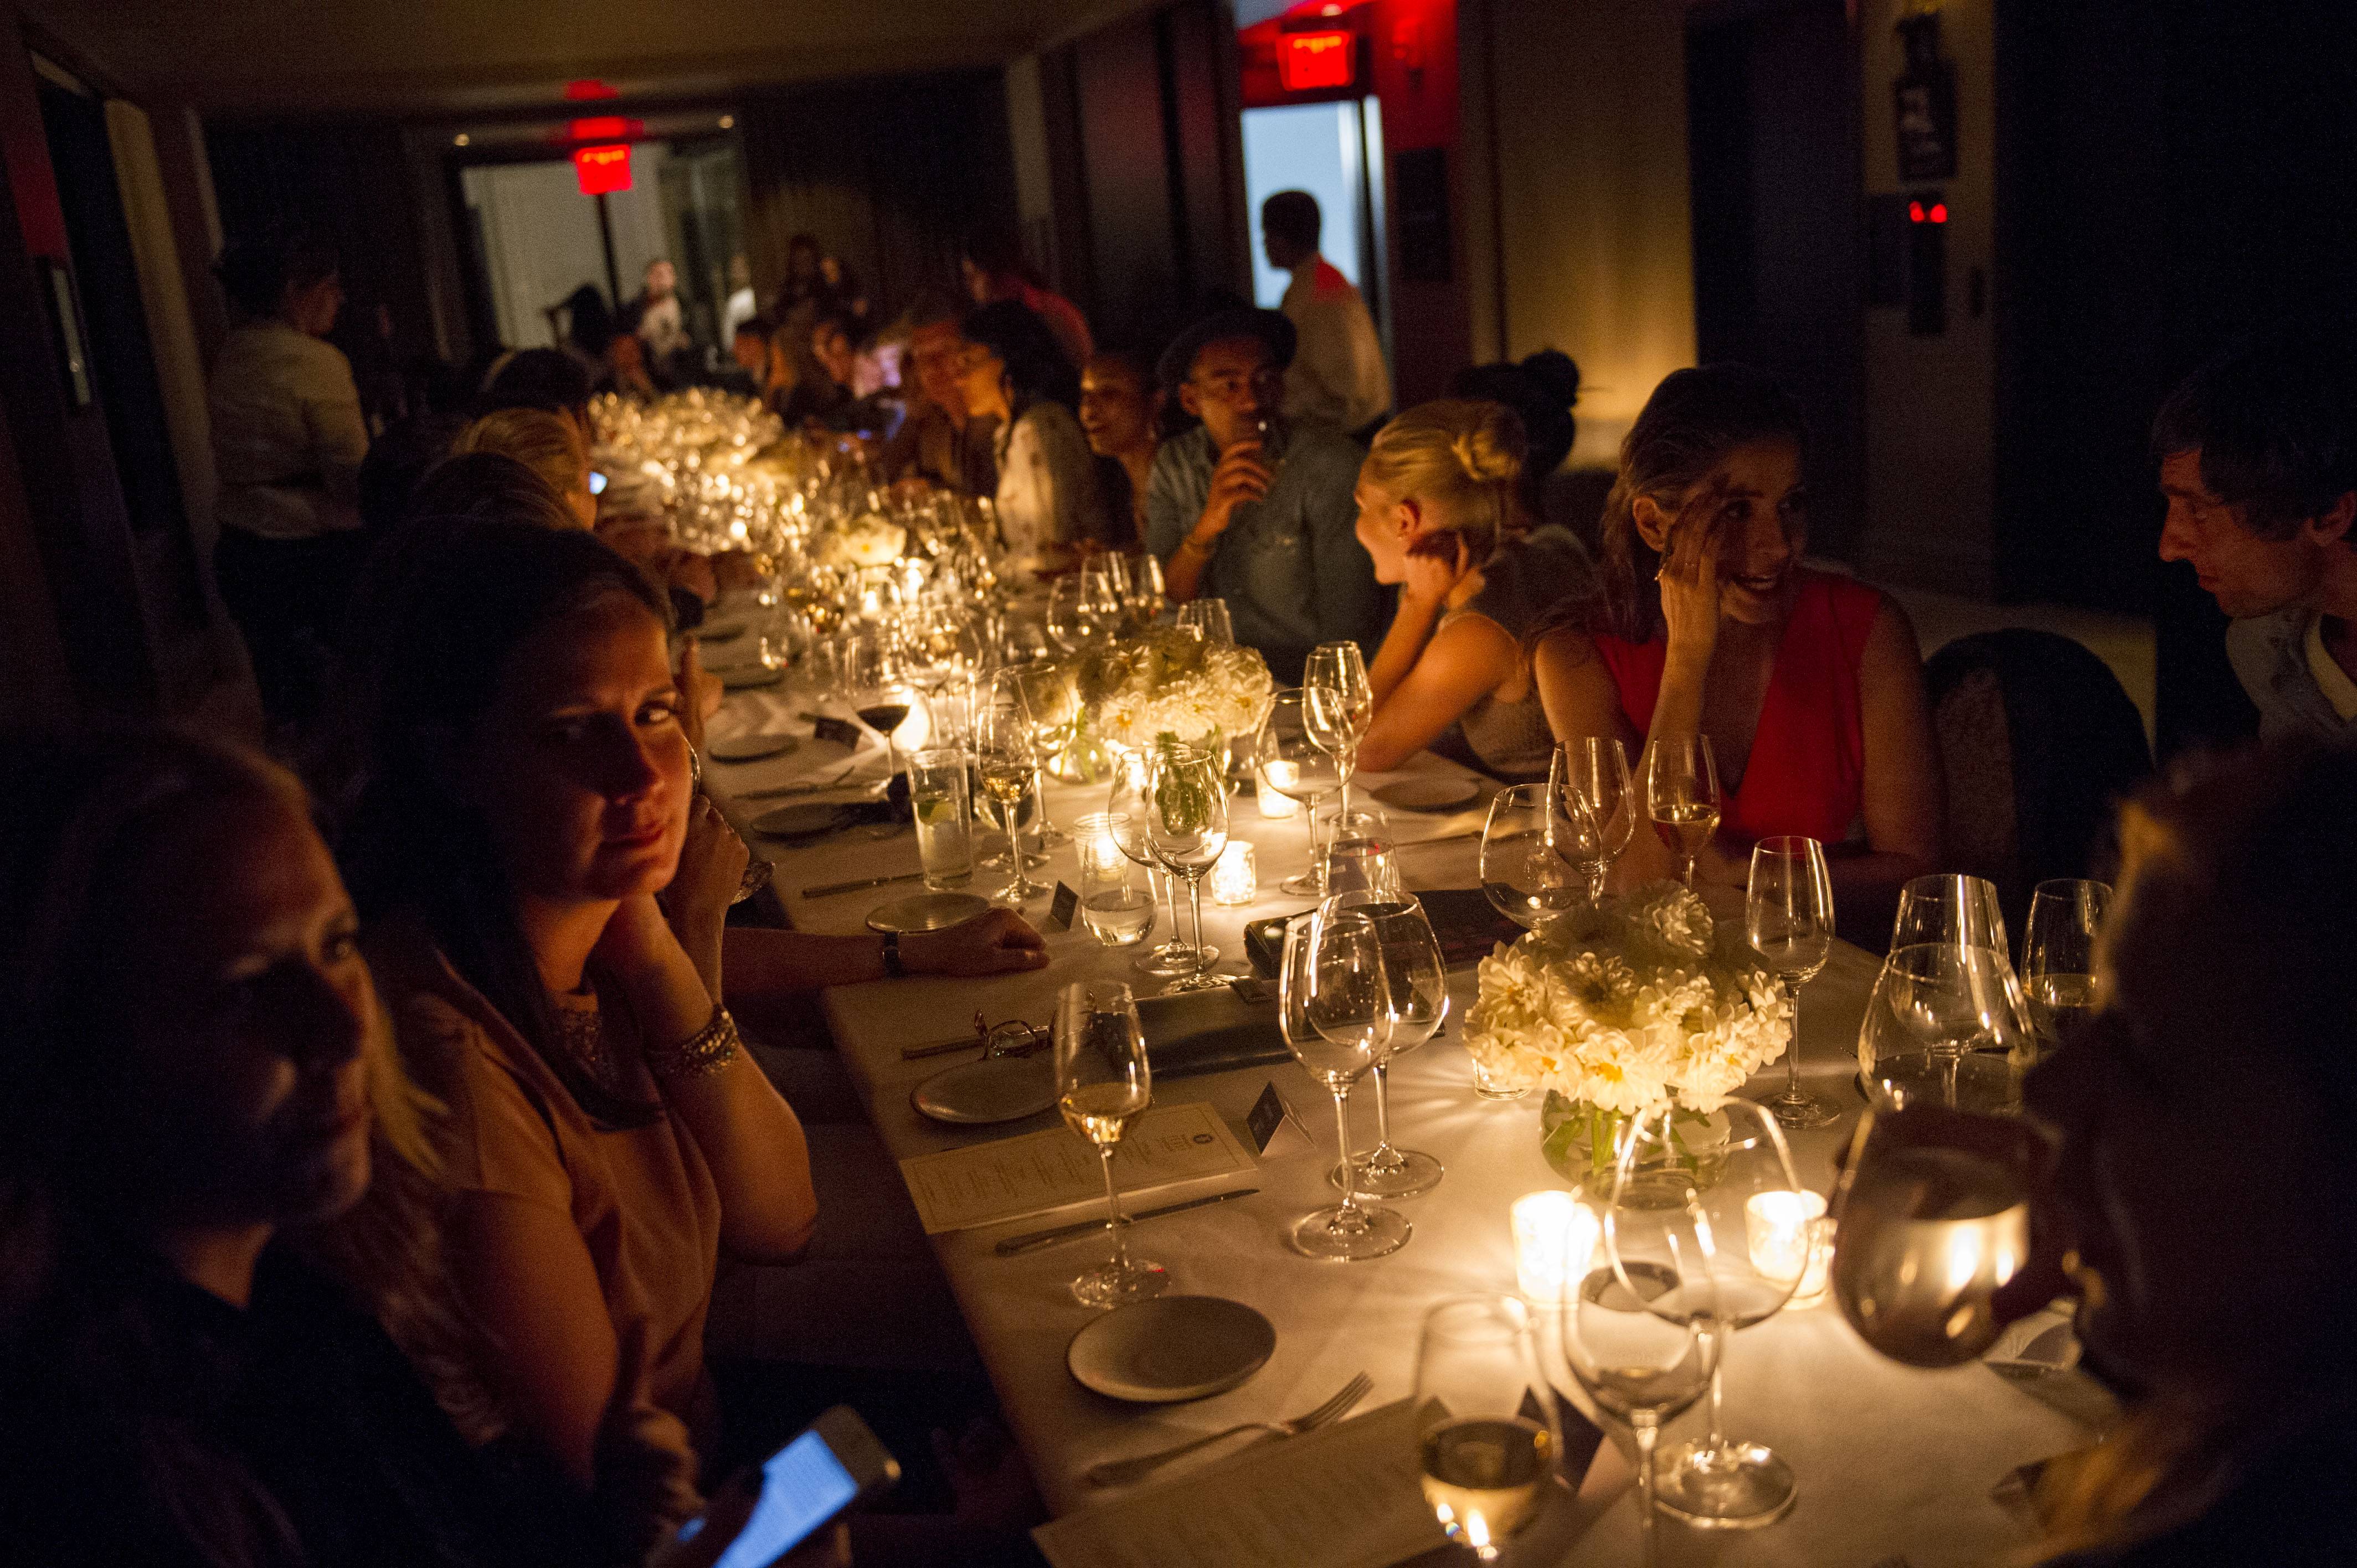 Feast or Fashion Bon Appetit dinner at NoMad Rooftop, co hosted by Adam Rapoport and Rachel Roy for New York Fashion Week